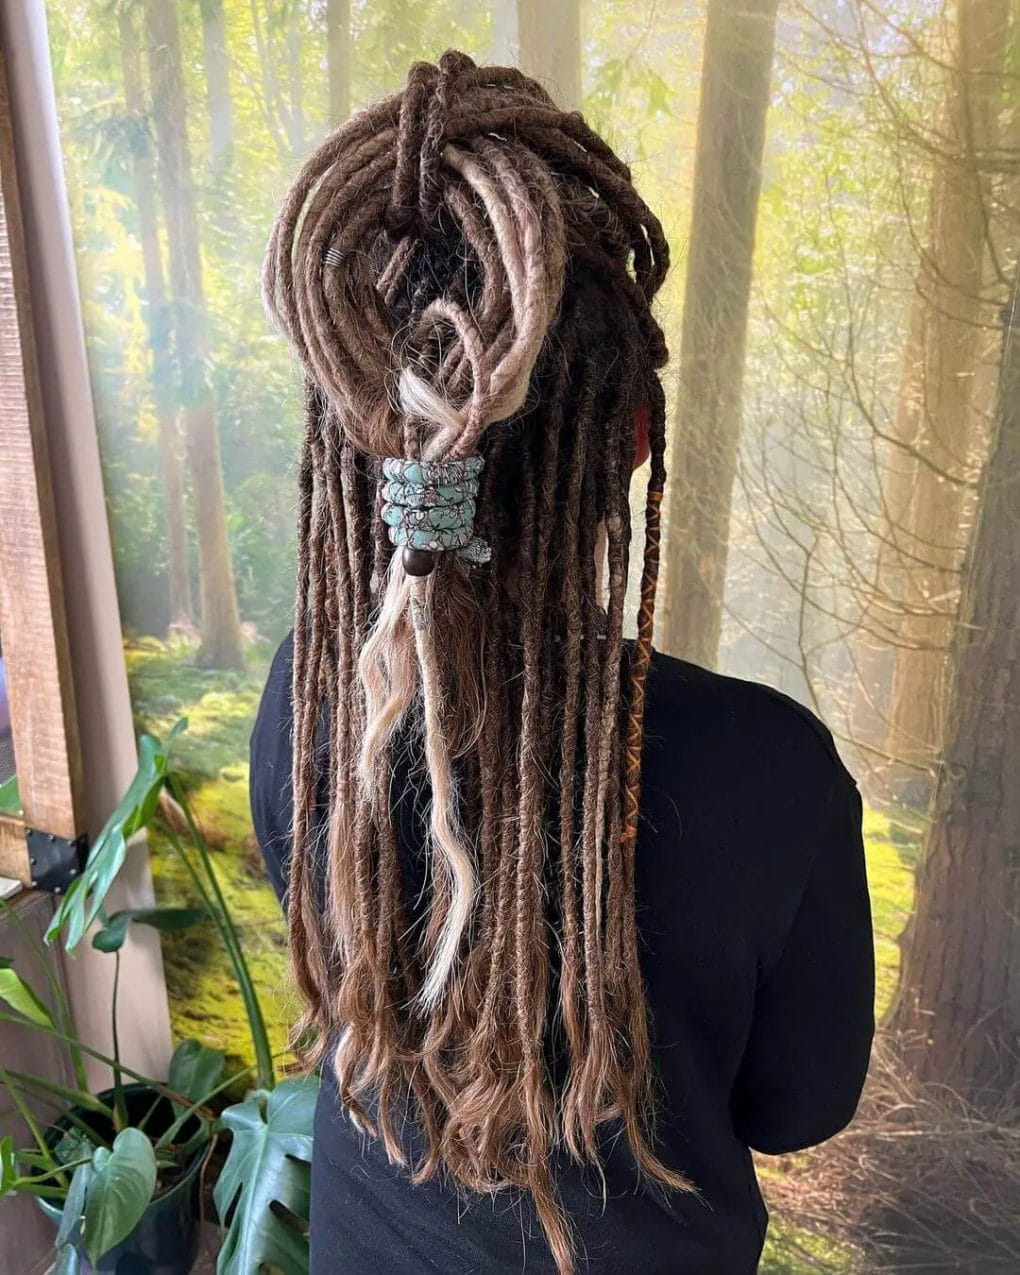 Brunette dreadlocks with blonde highlights, adorned with threads and beads, and fashioned into a loose braid down the back.